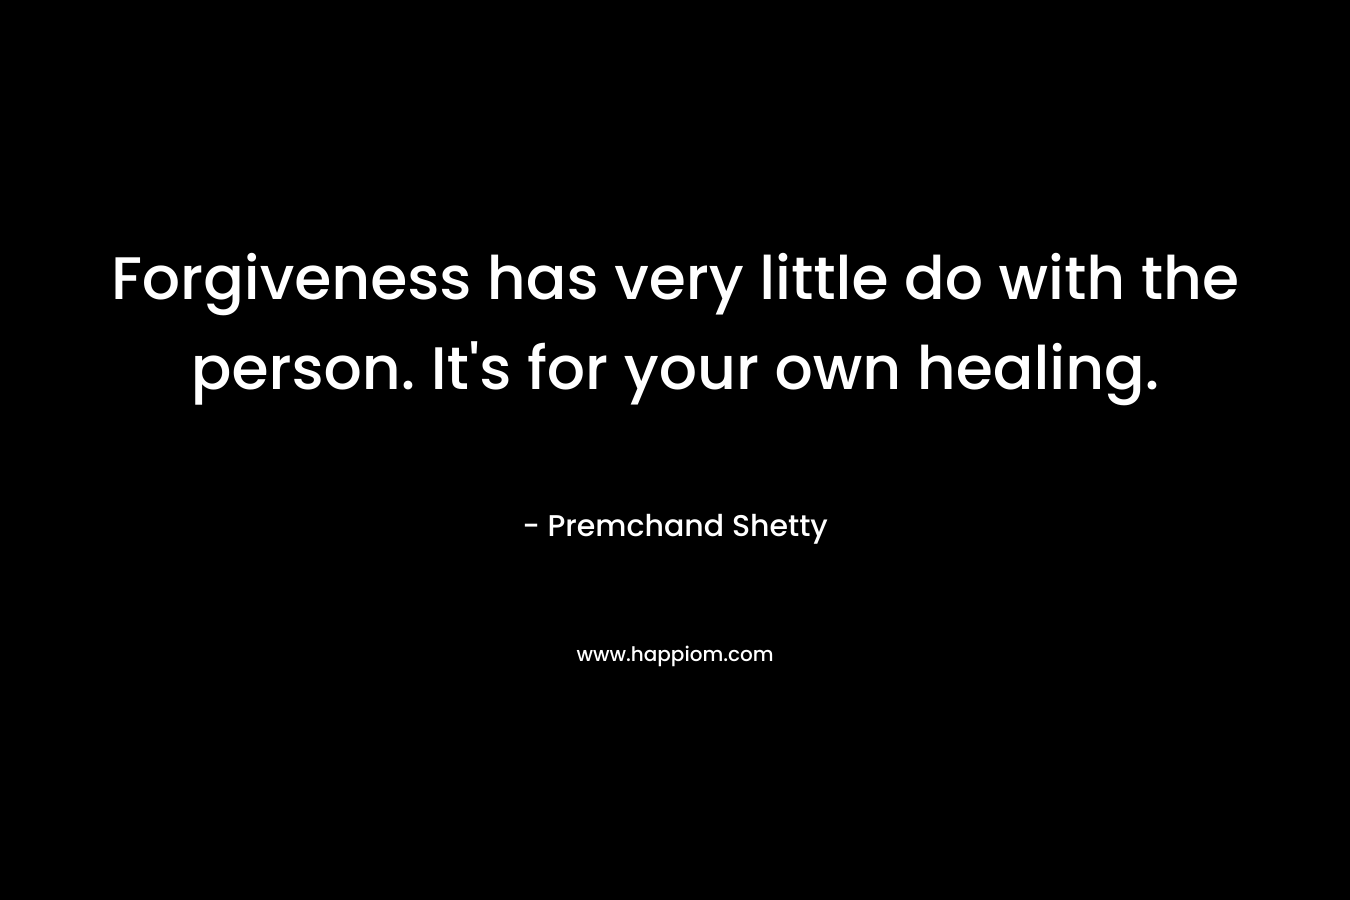 Forgiveness has very little do with the person. It's for your own healing.